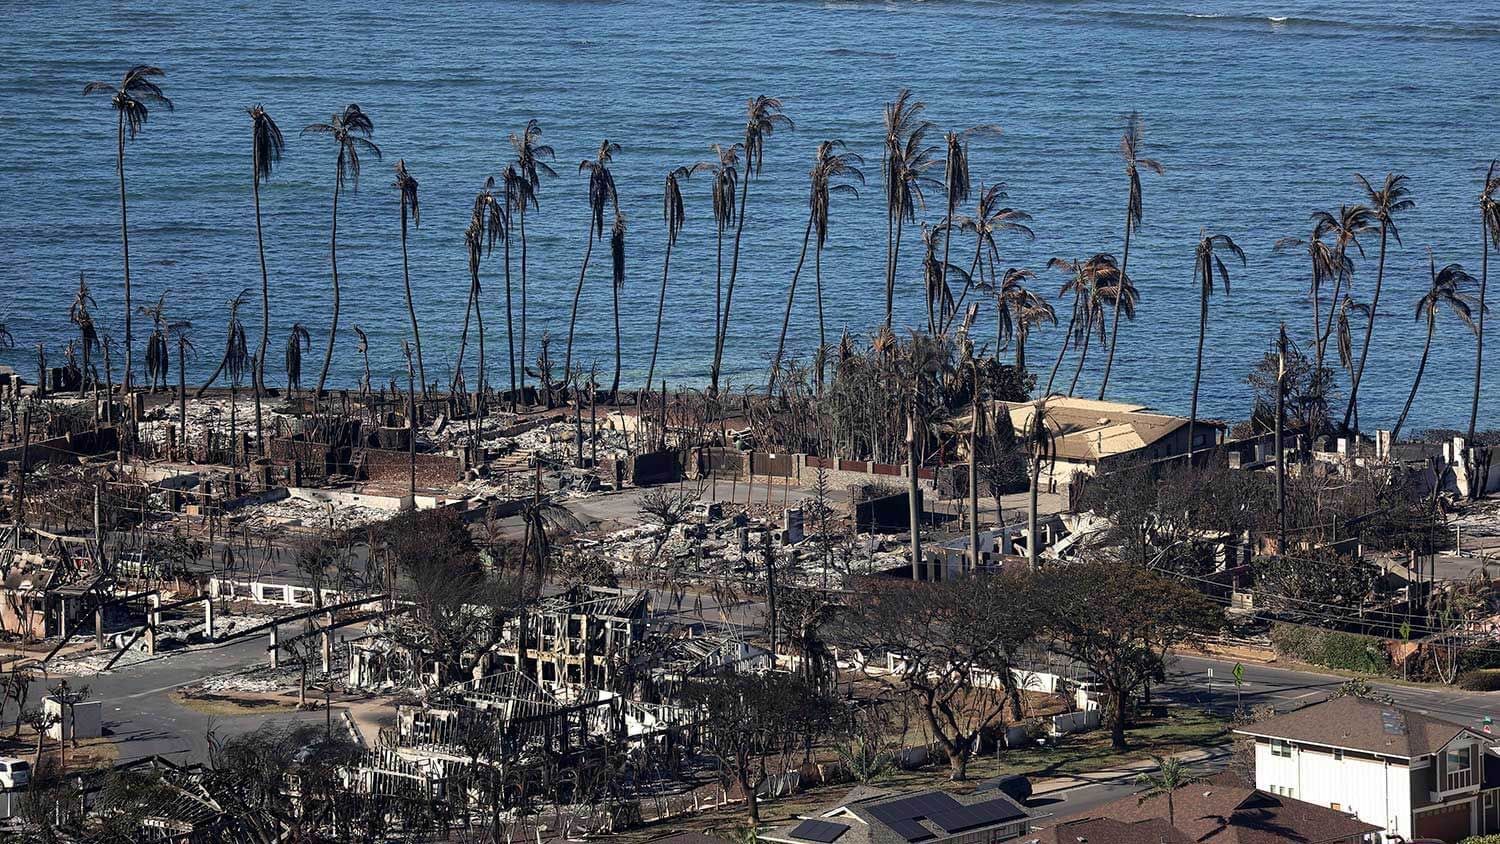 Hawaii wildfire damage with beach and burnt palm trees